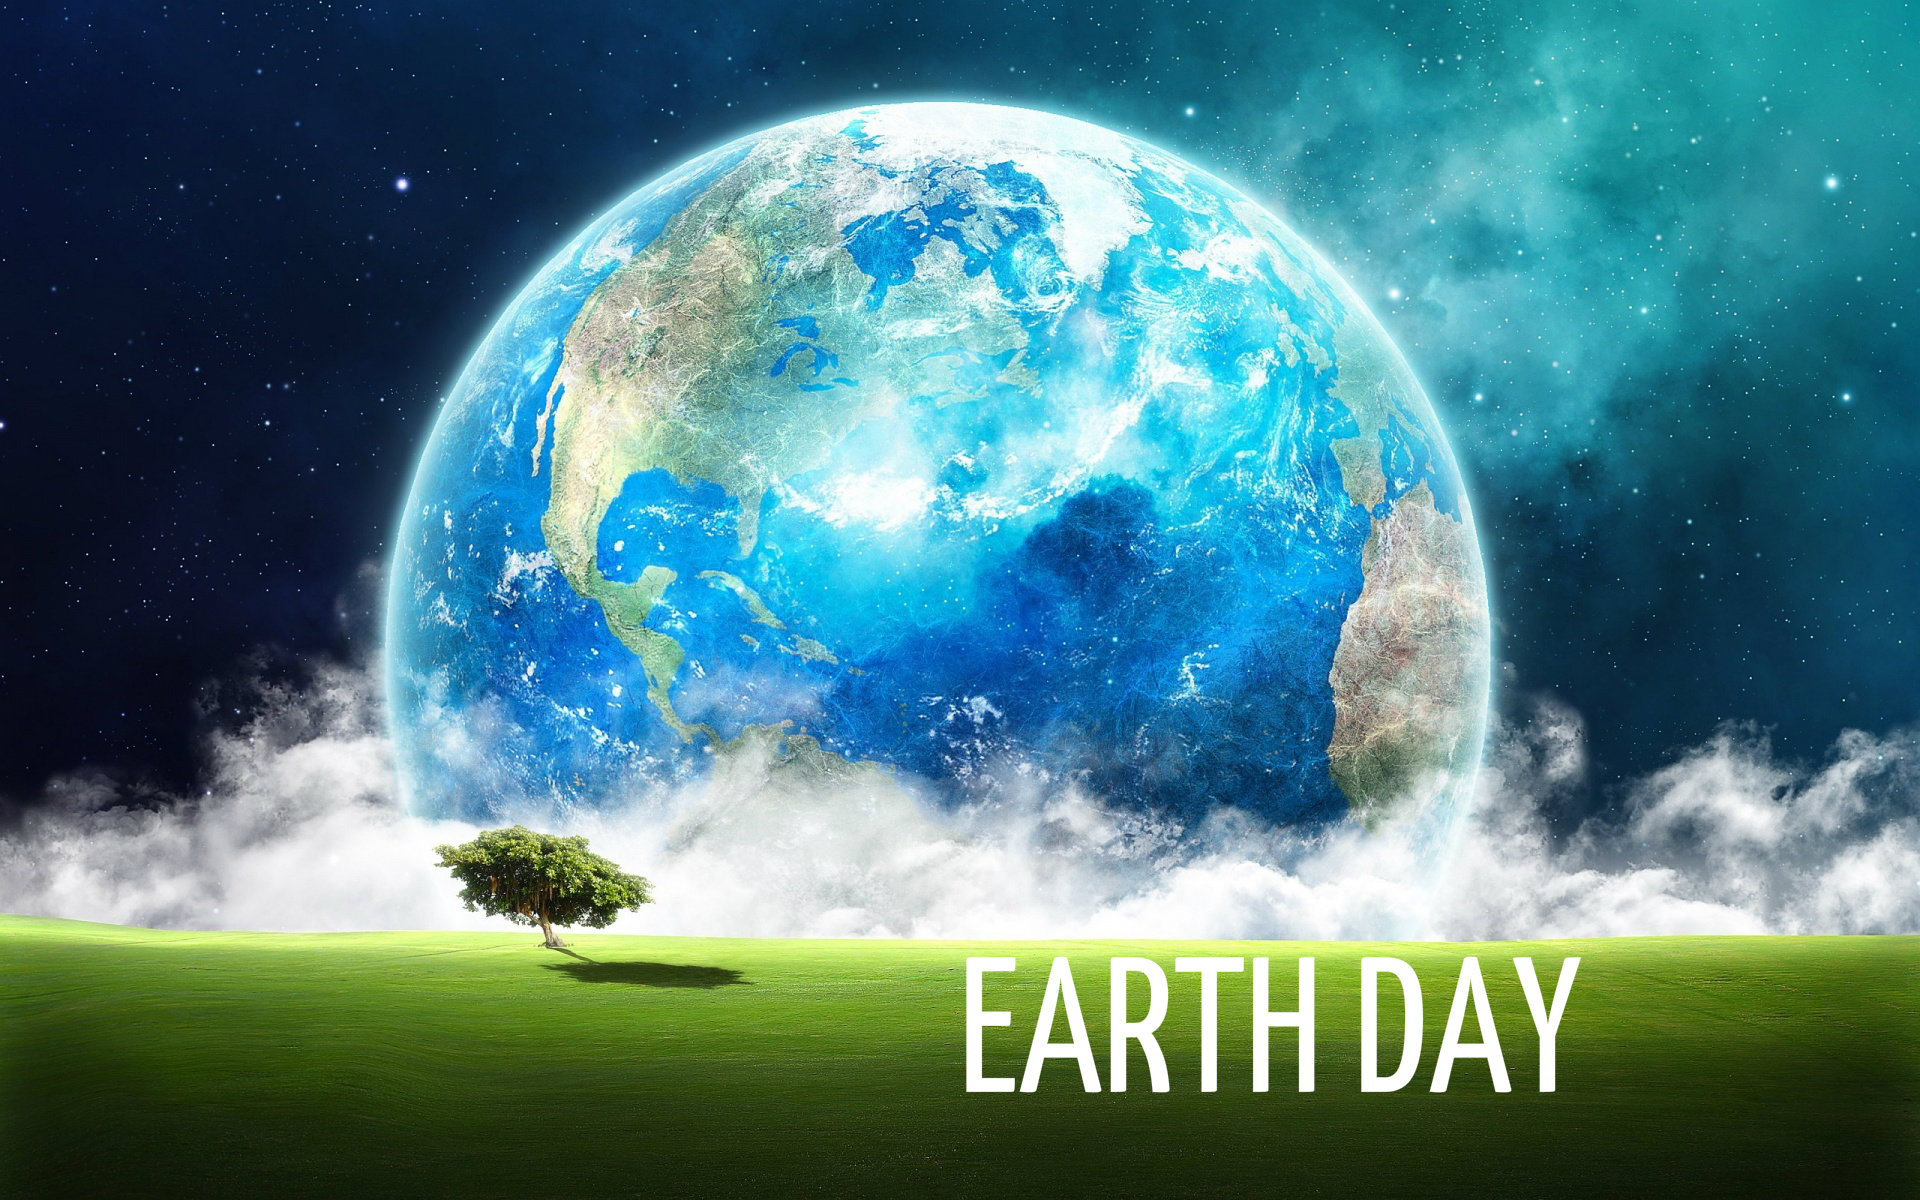 Happy Earth Day Full HD 1080p Wallpaper Photos Most